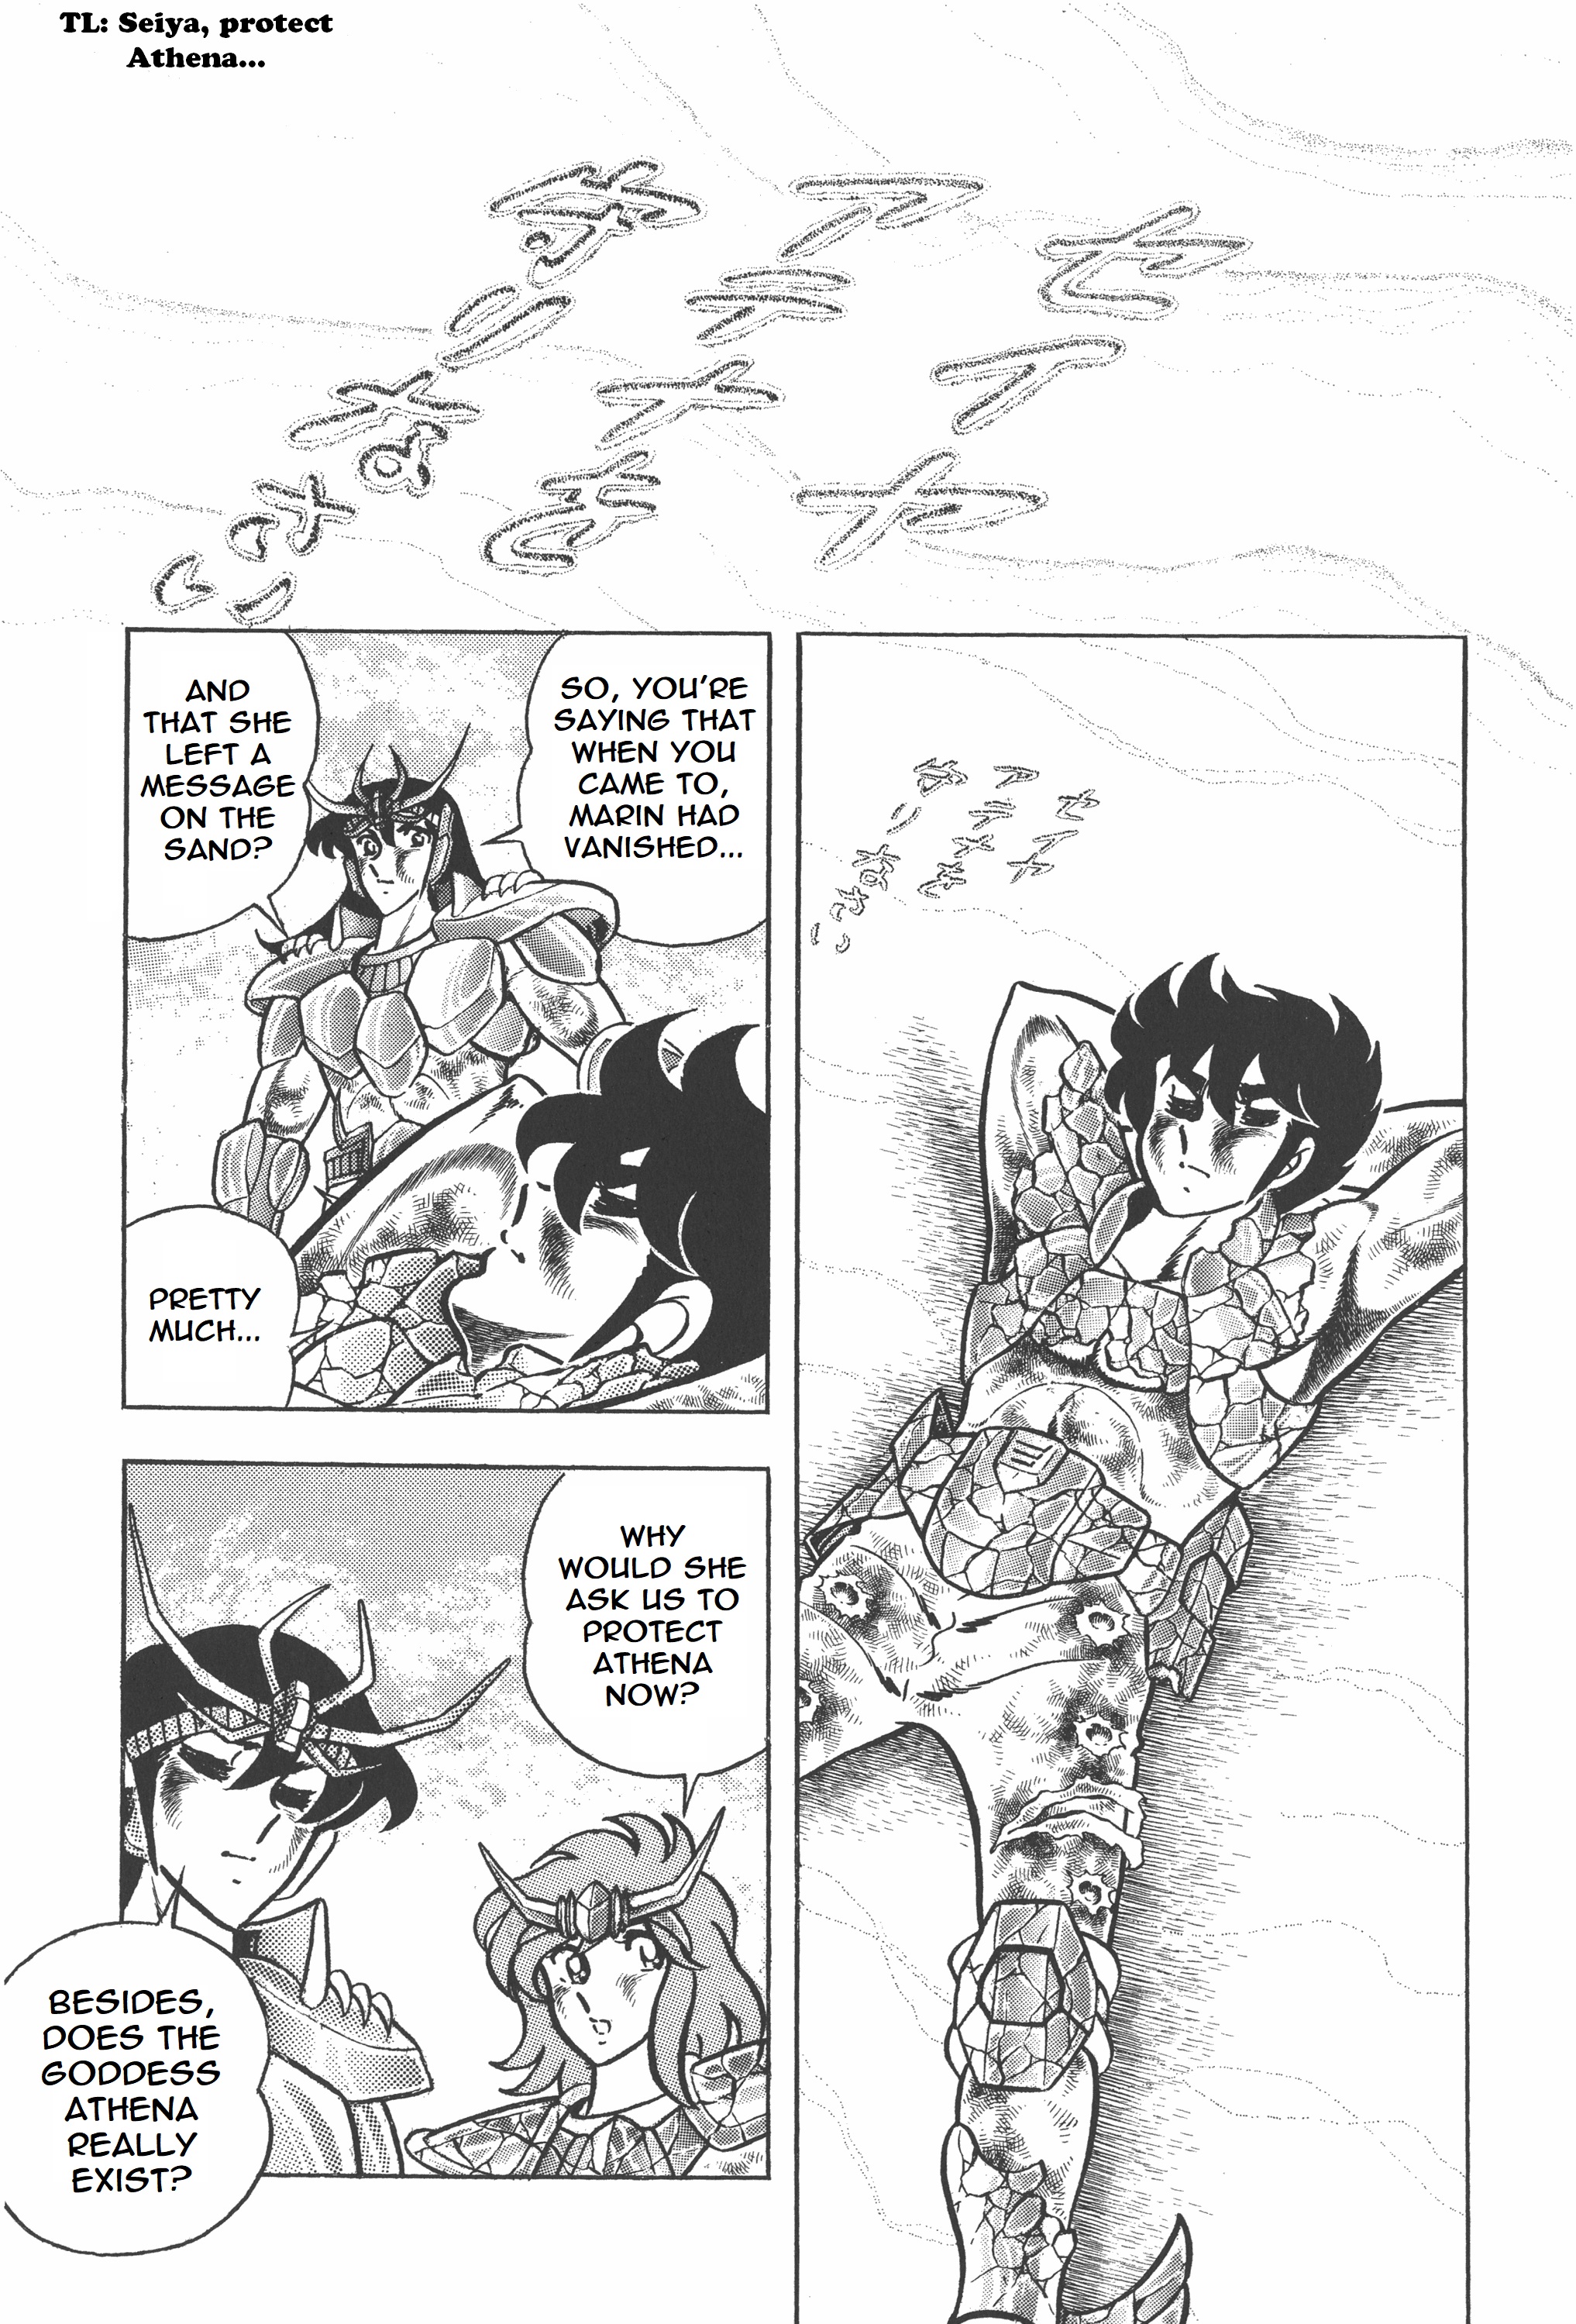 Saint Seiya (Kanzenban Edition) Vol.5 Chapter 24: Fight! For The Sake Of Athena - Picture 2